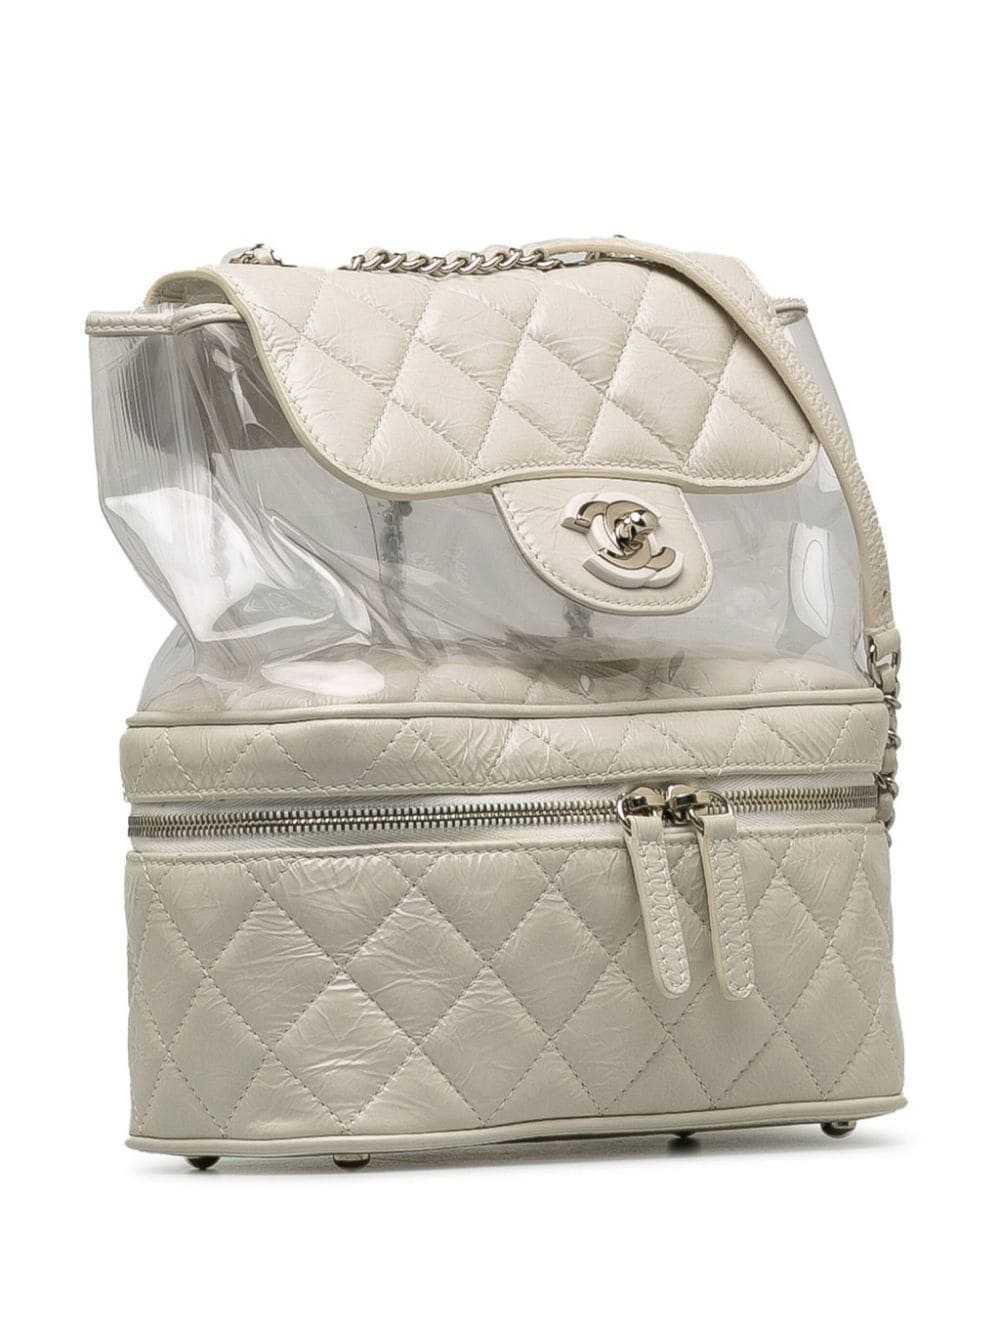 CHANEL Pre-Owned 2018 Aquarium backpack - White - image 3